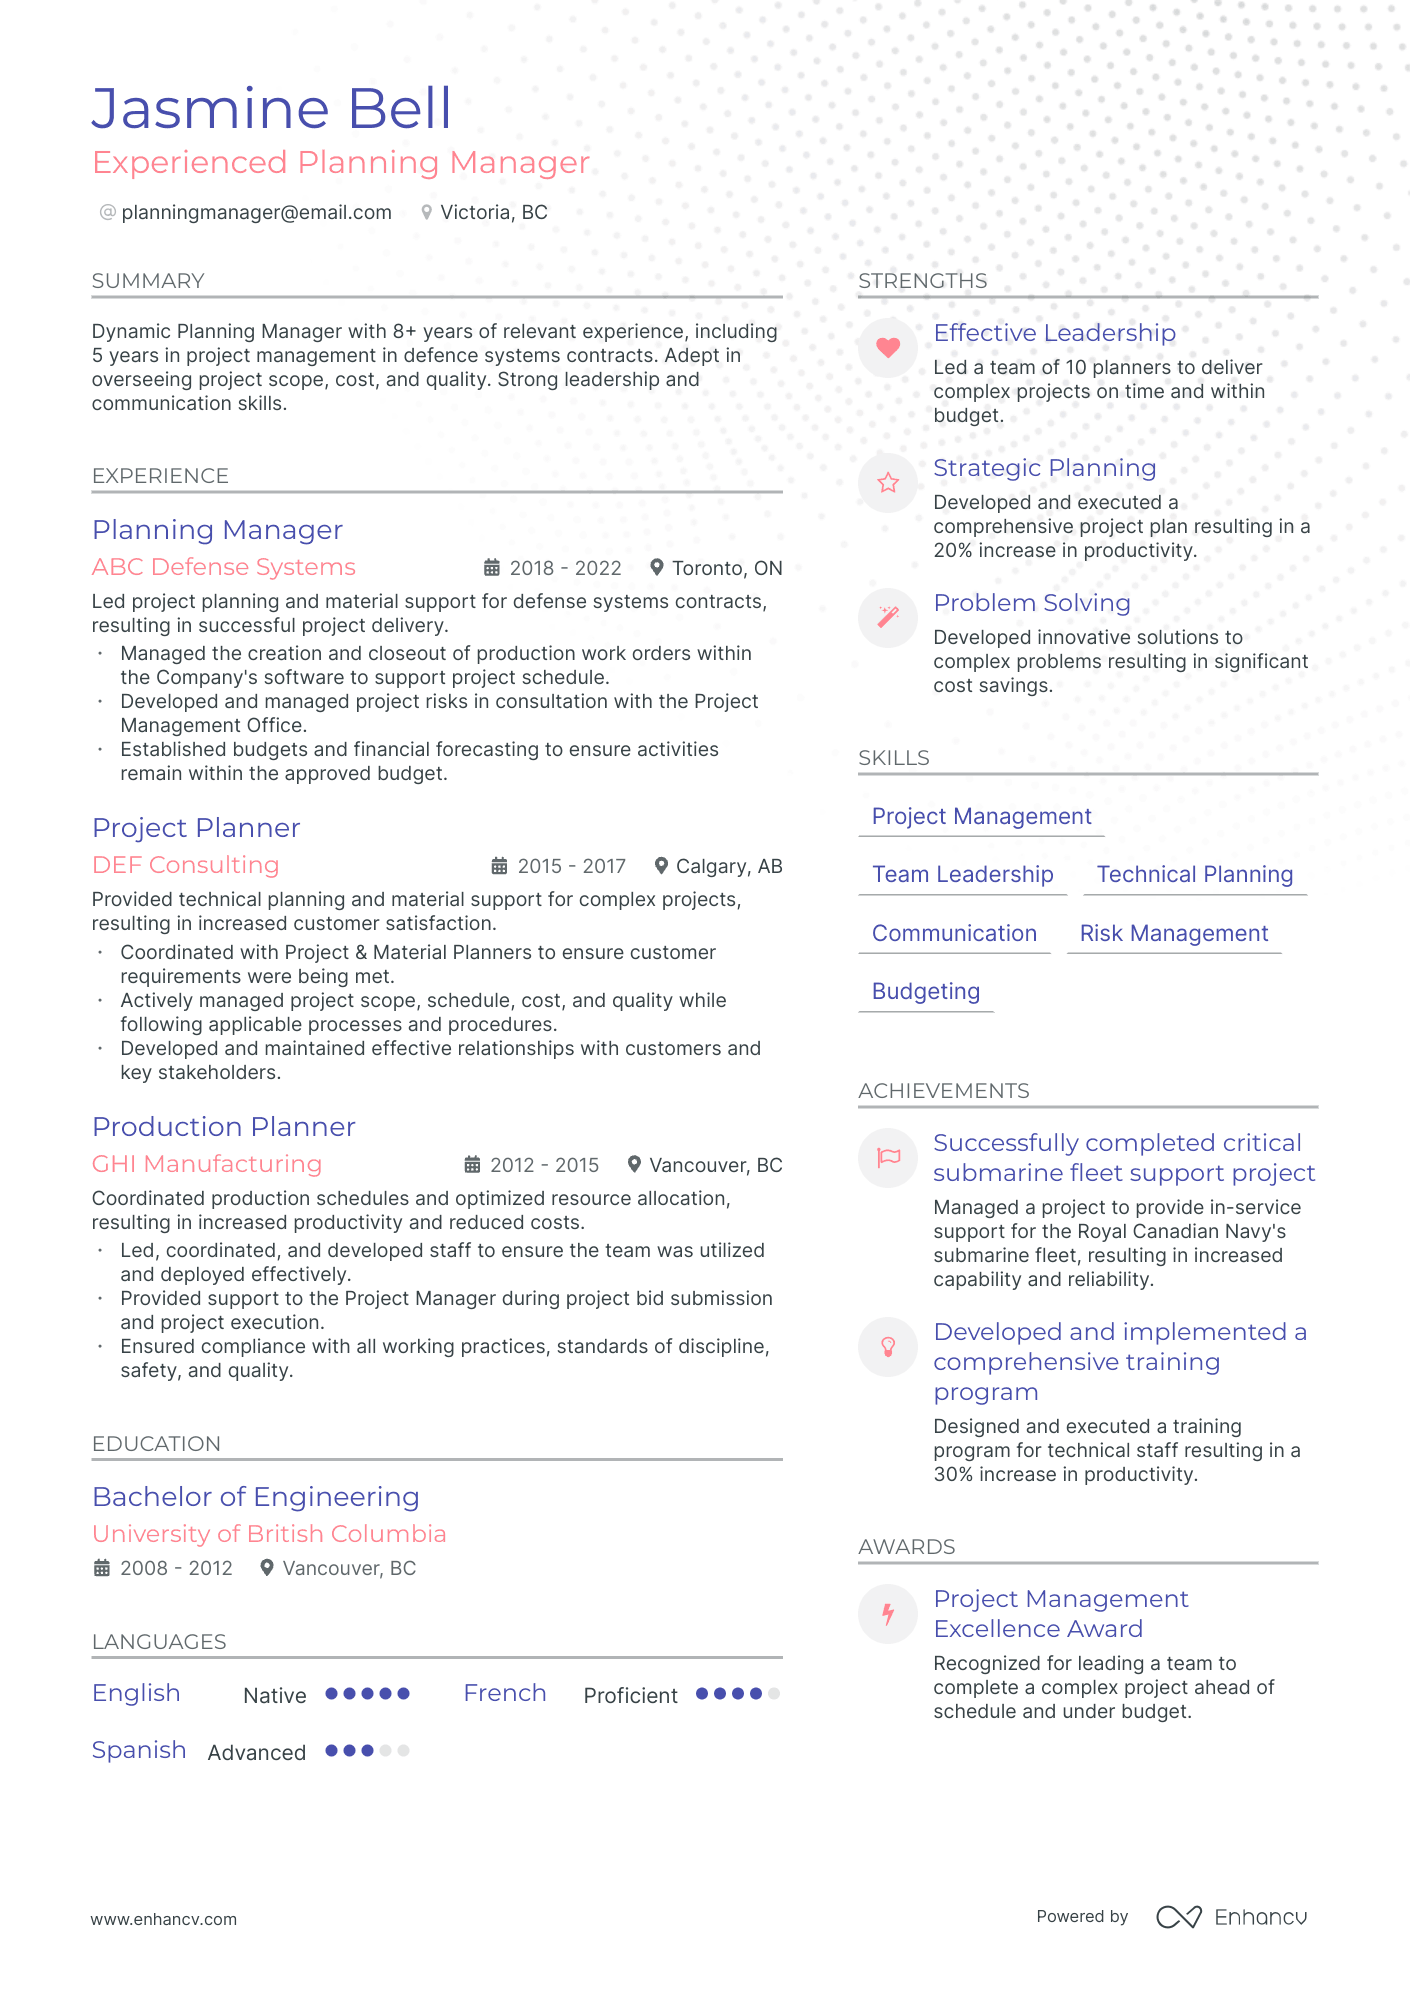 Planning Manager resume example